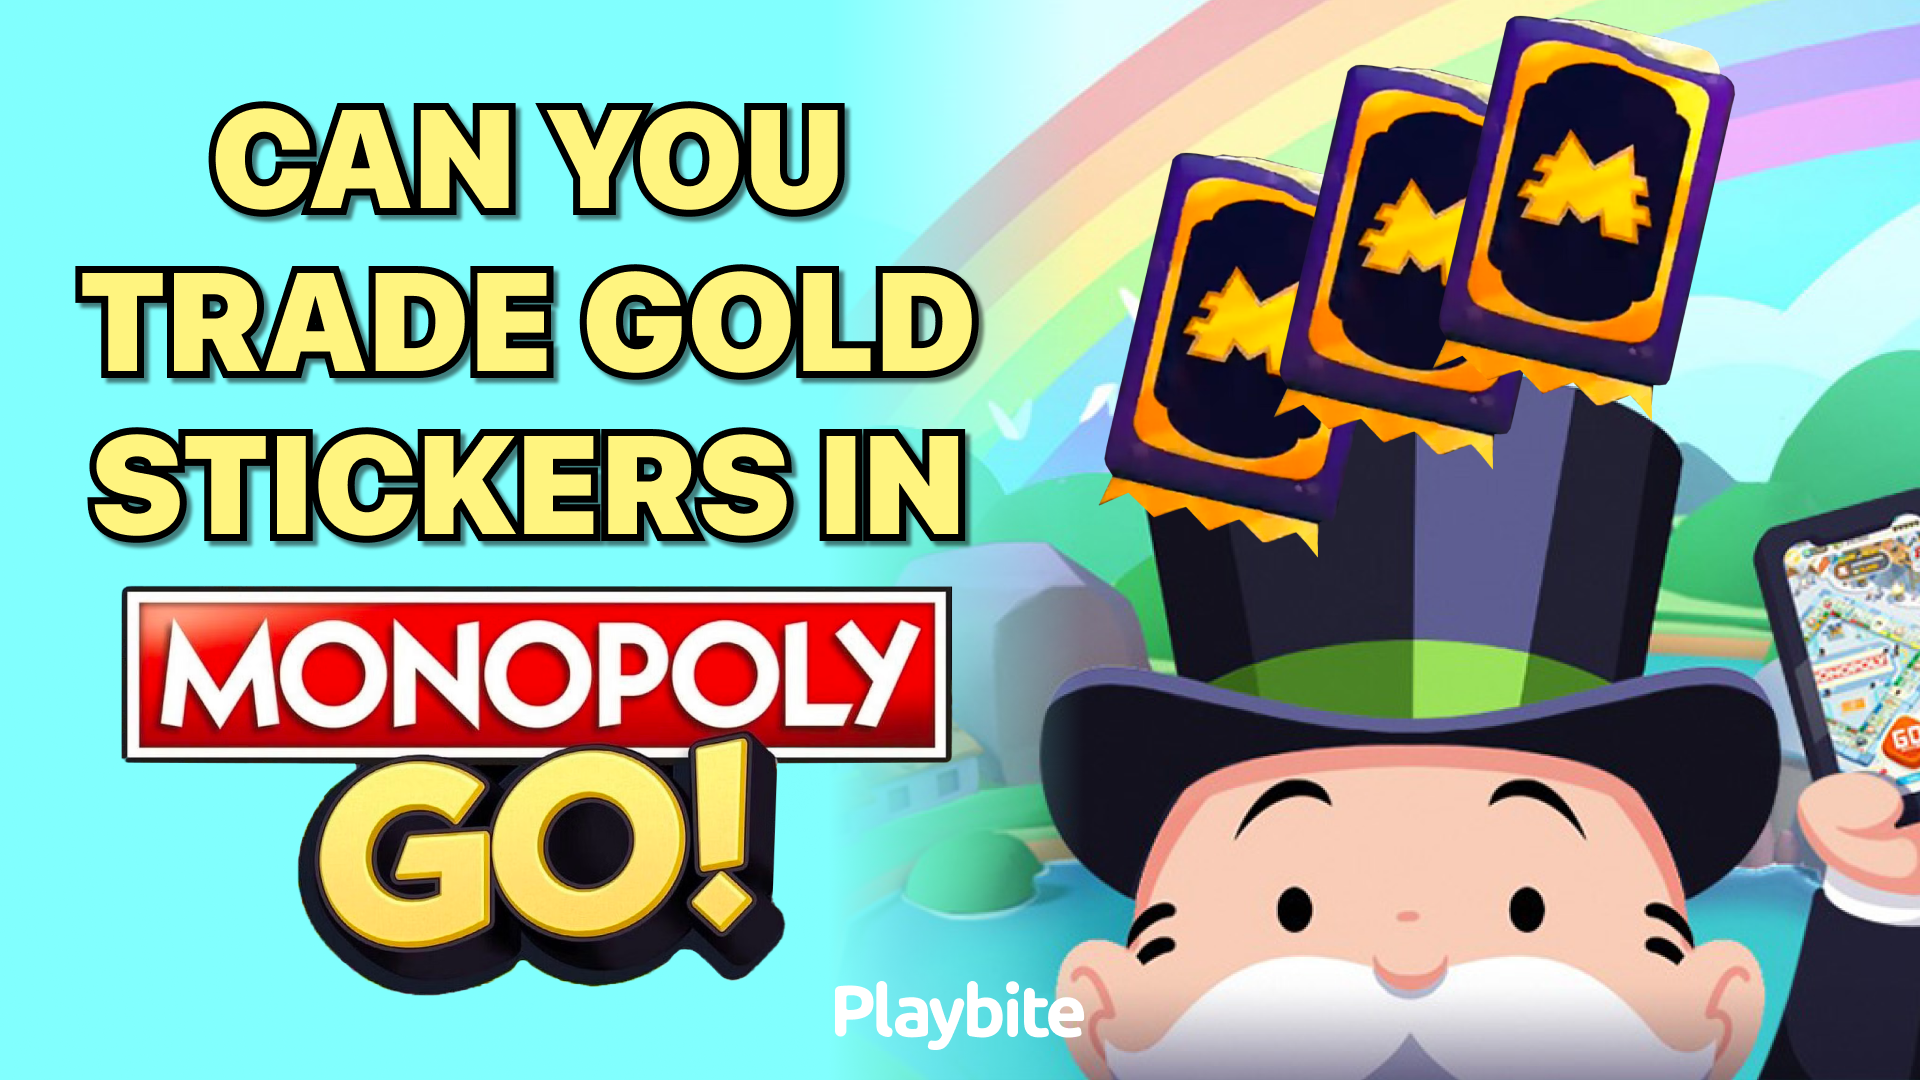 Can You Trade Gold Stickers In Monopoly GO?